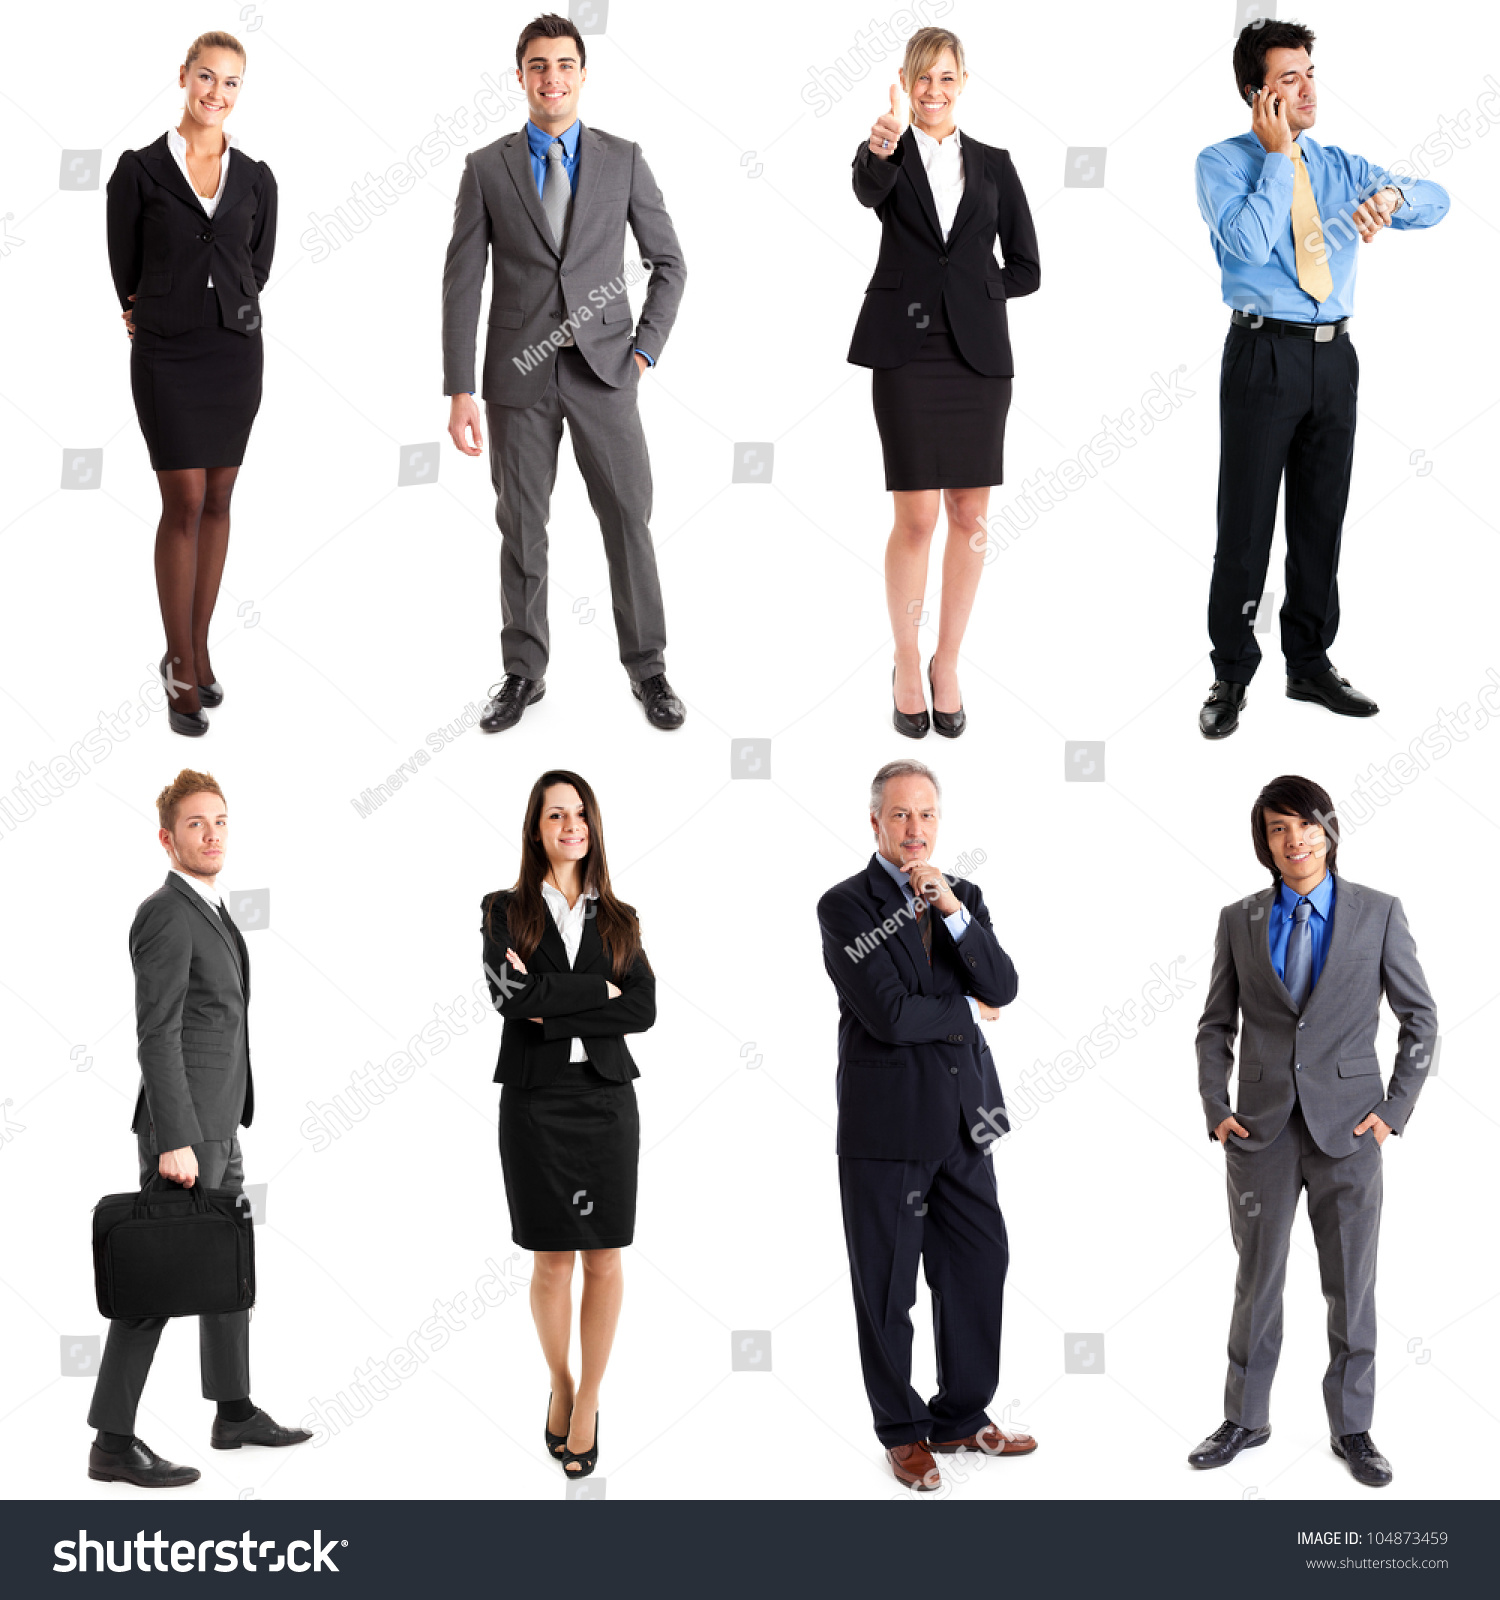 Collection Full Length Portraits Business People Stock Photo (Edit Now ...